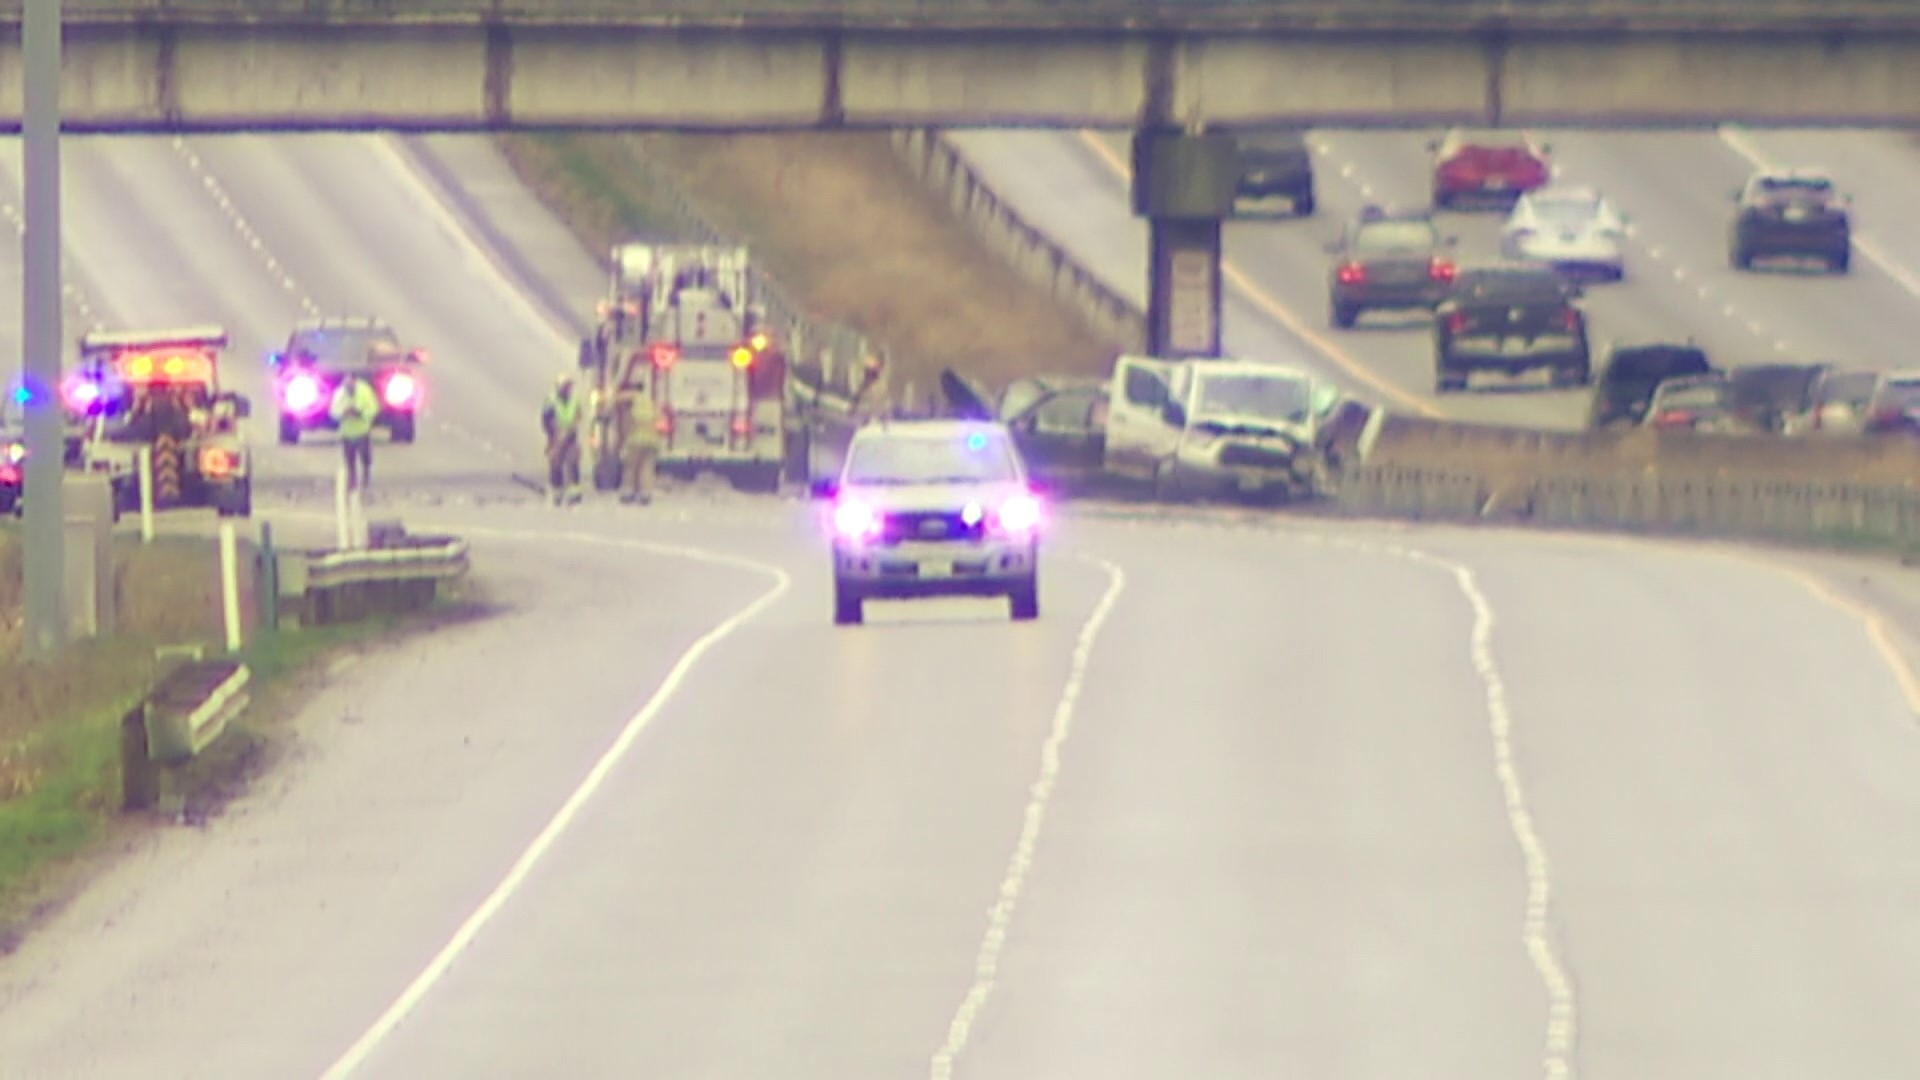 WSP trooper killed in 'serious incident' on I5 north of Marysville